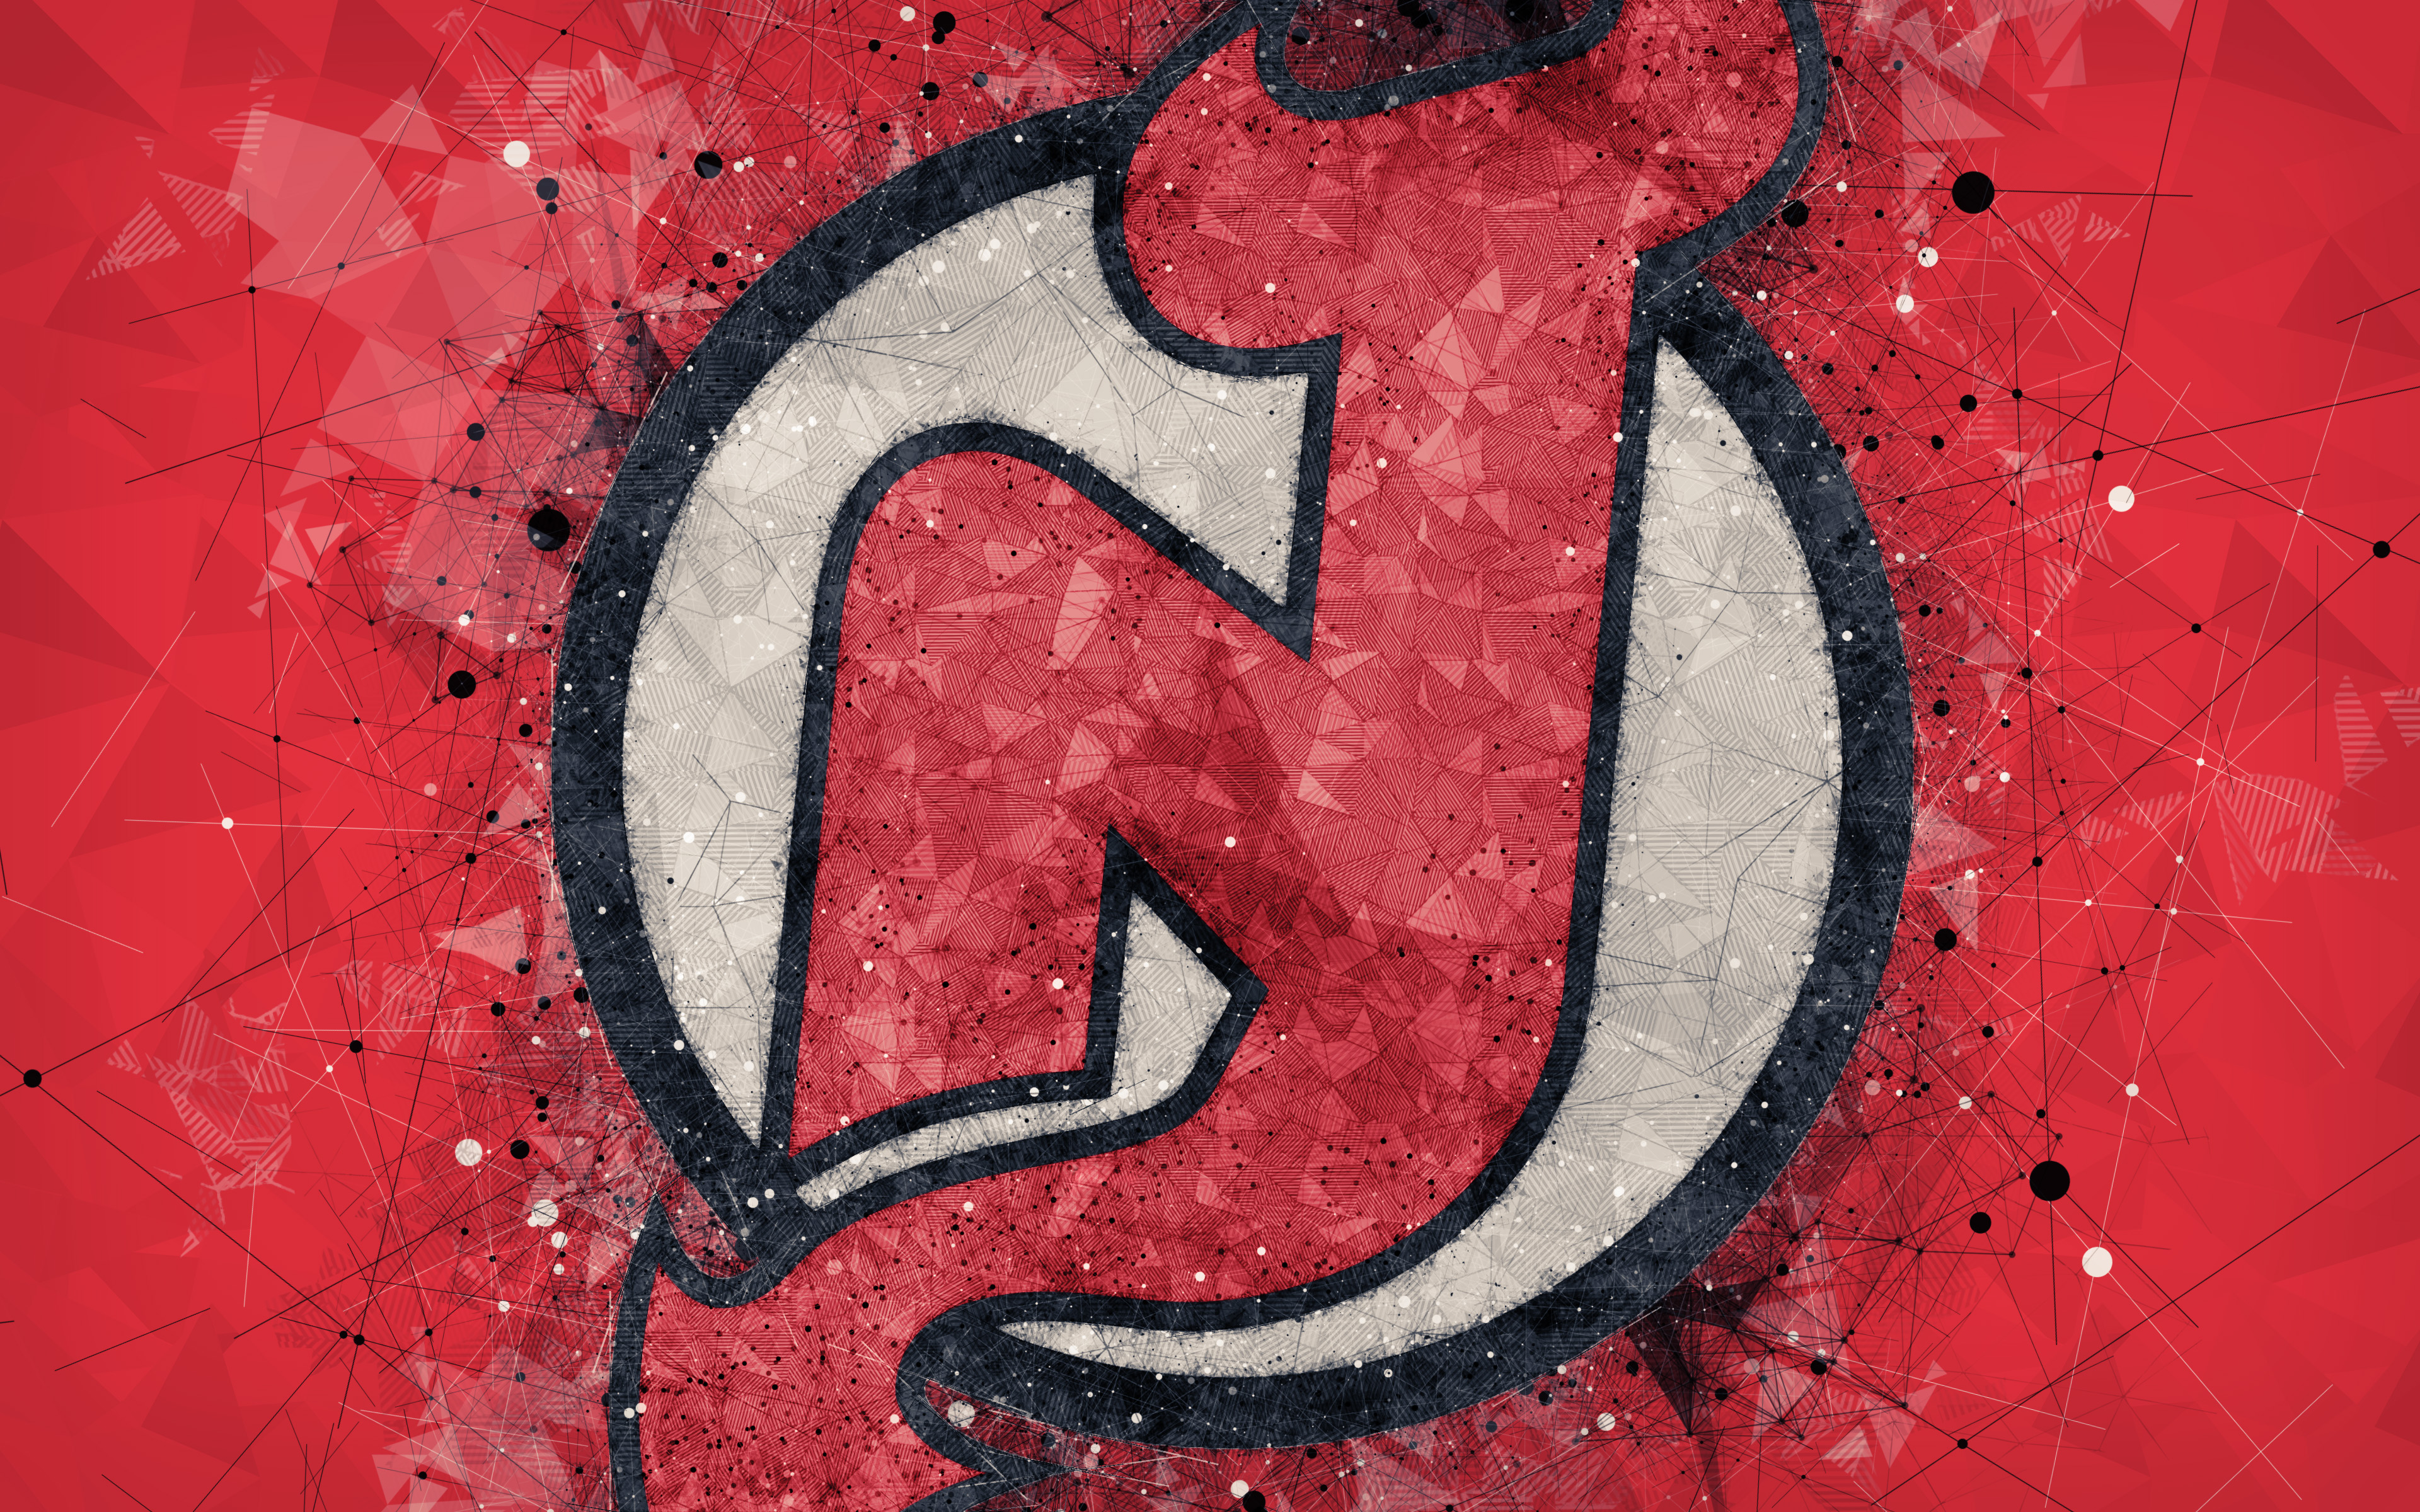 New Jersey Devils Wallpaper for Android 2880x1920